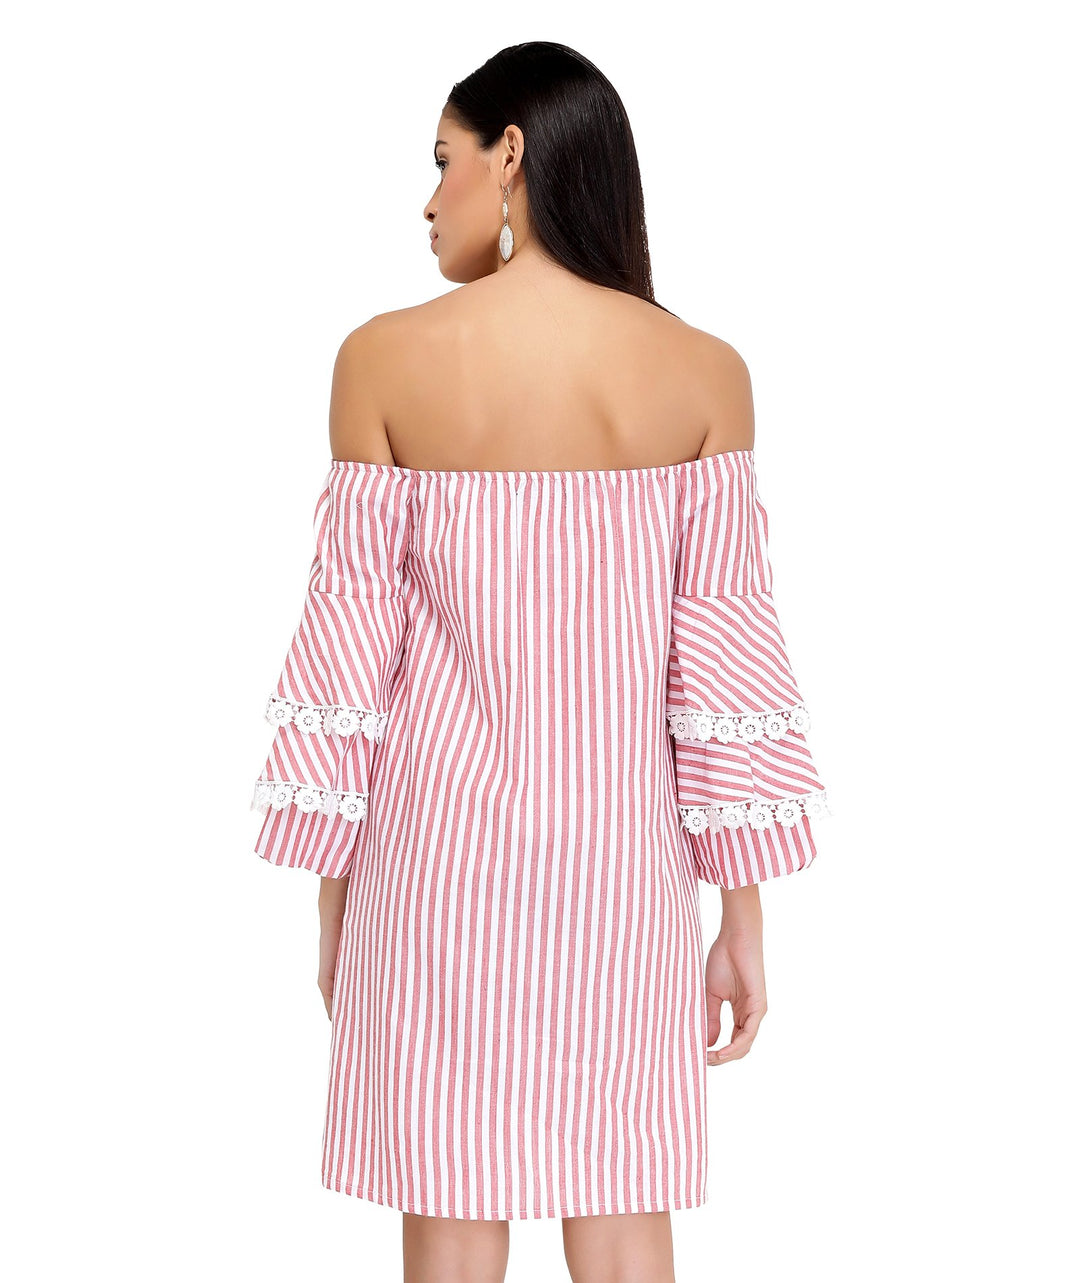 Candy Bardot Dress with Statement Sleeves